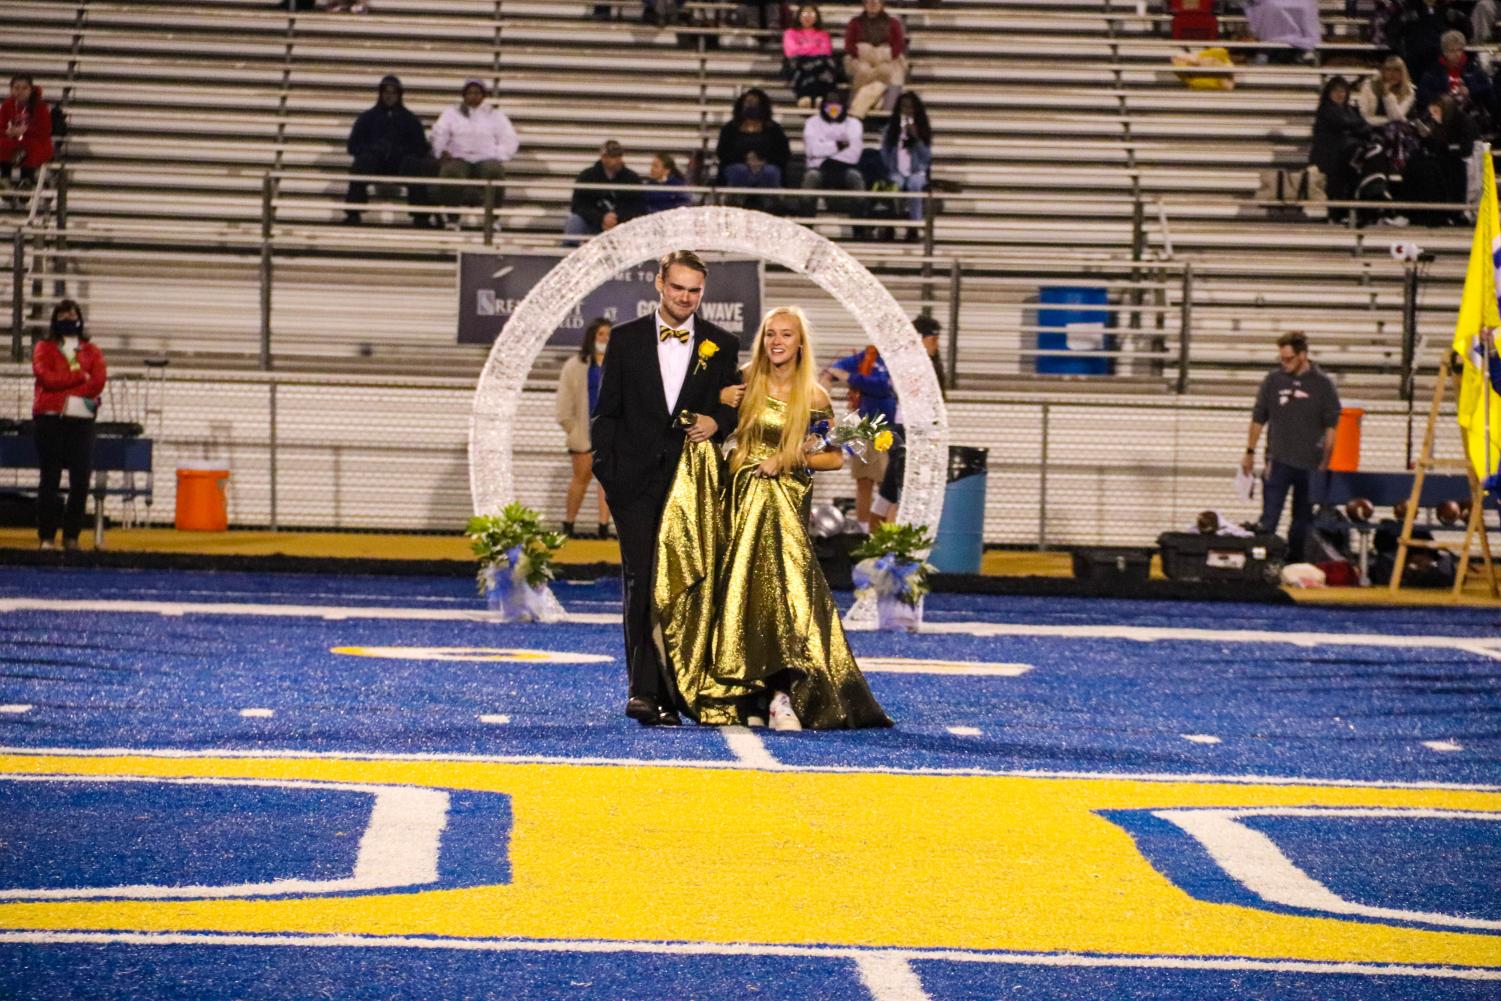 Halle+Traylor+named+2020+Homecoming+Queen